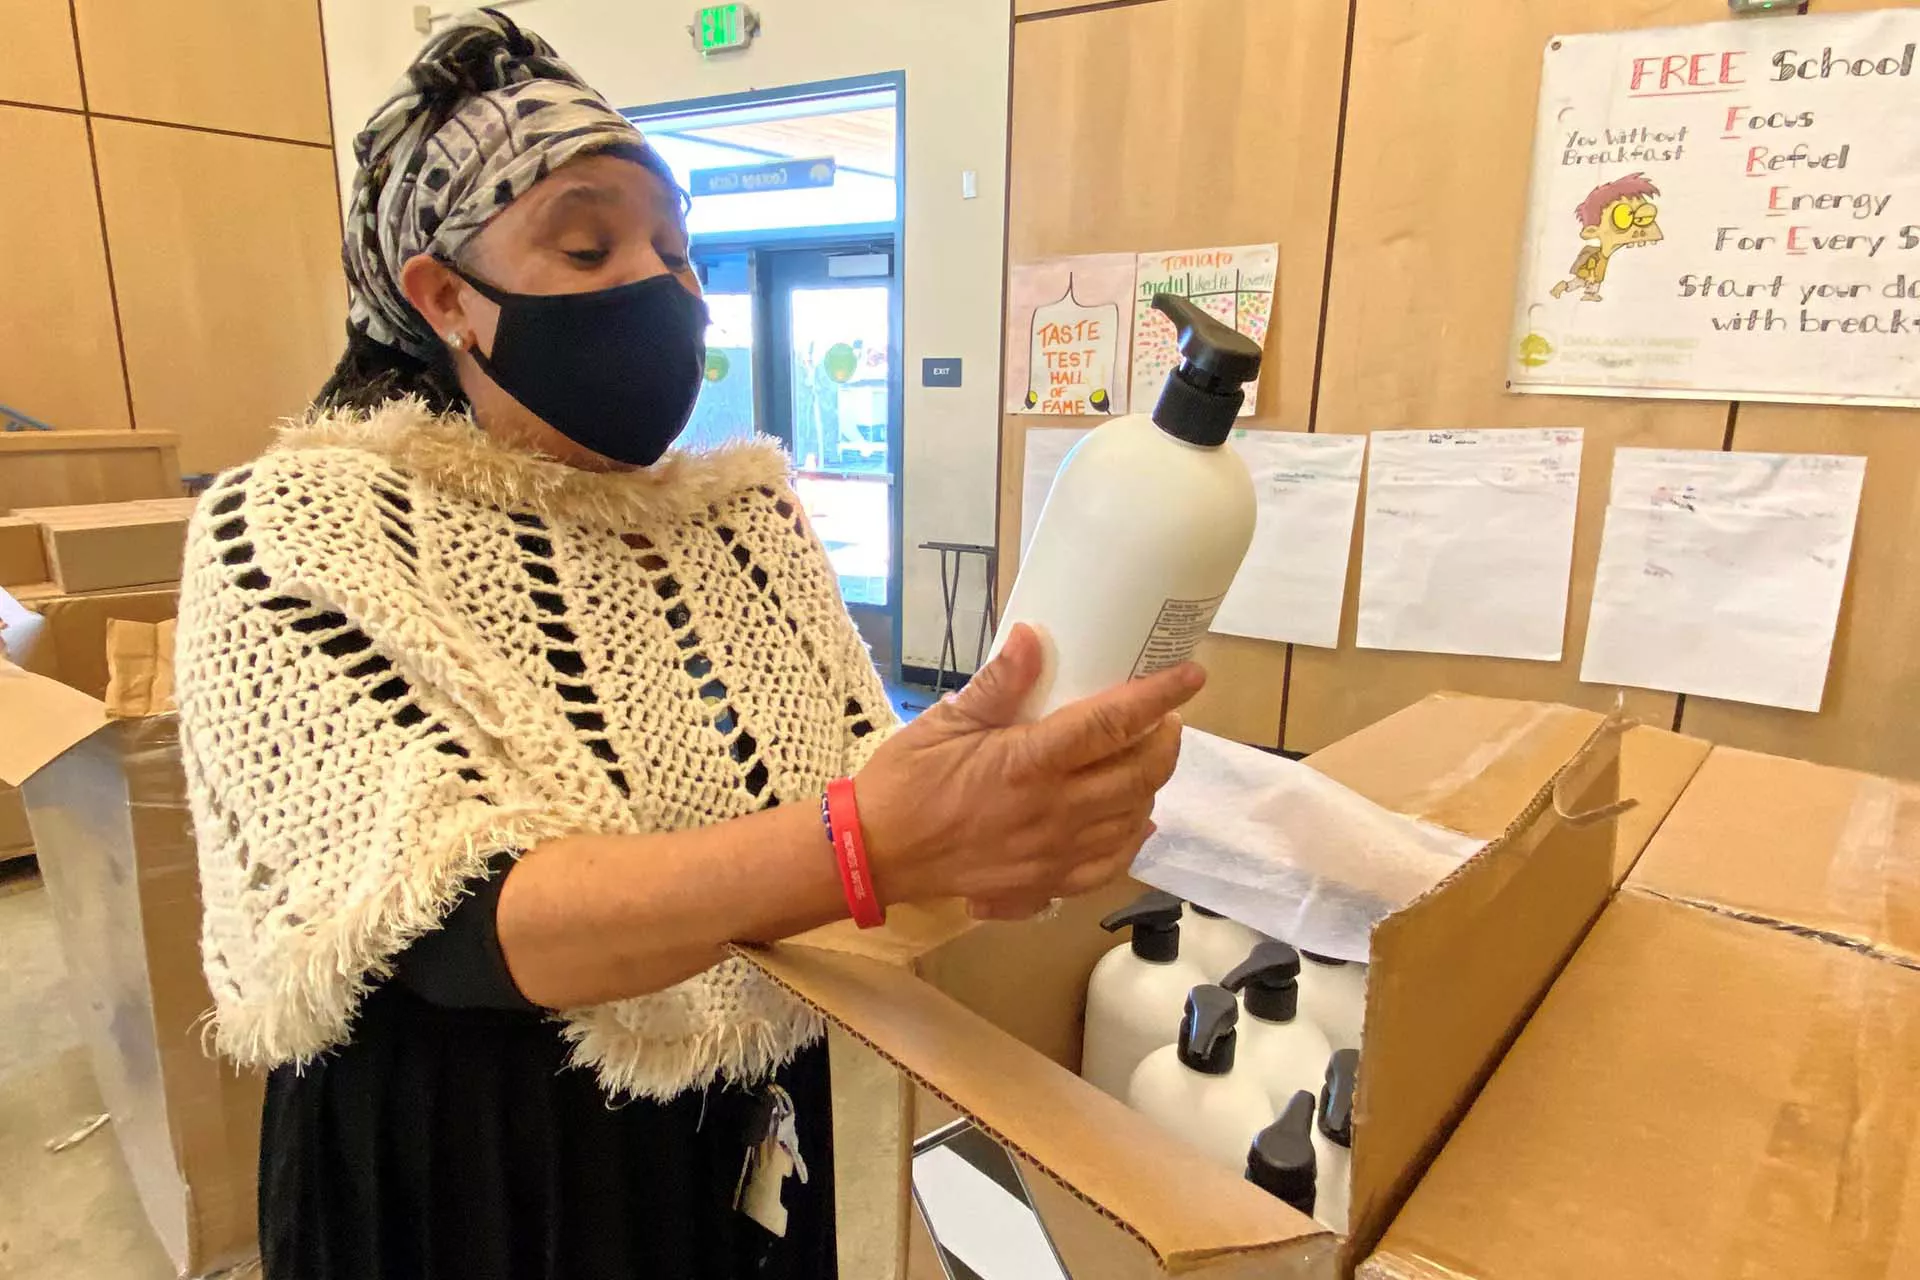 Woman looking at lotion product from a donated box of products